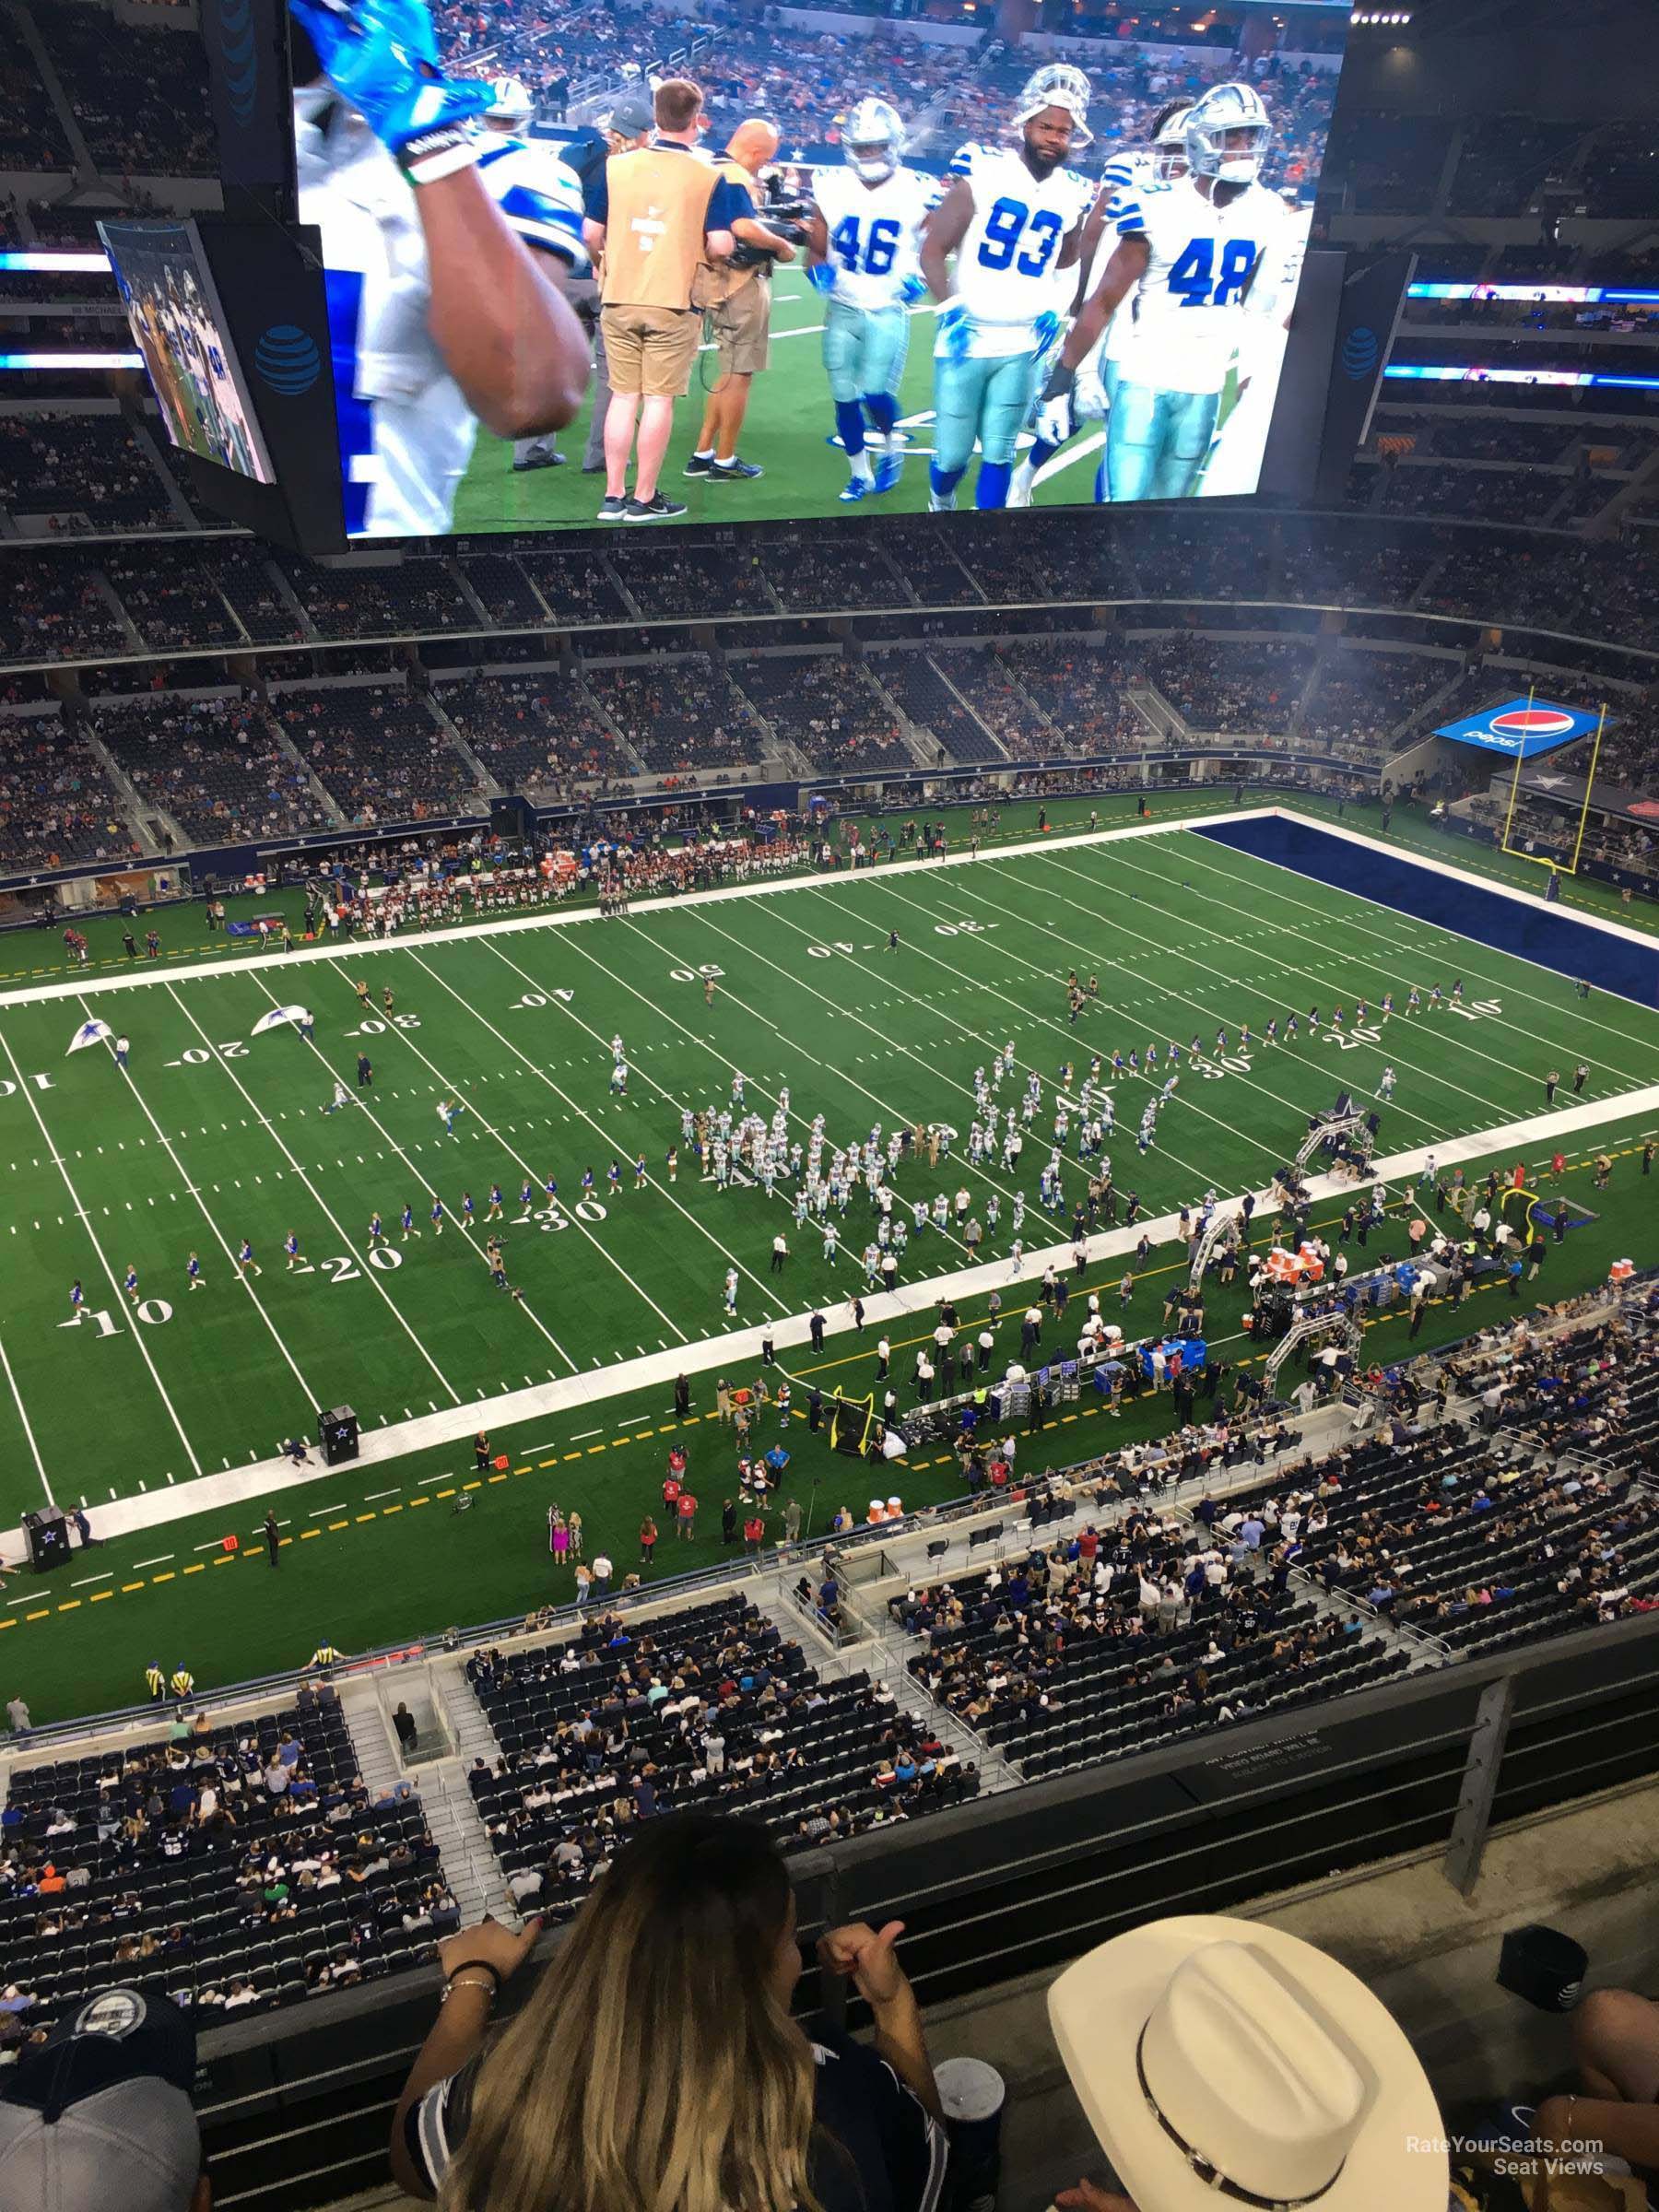 section 417, row 4 seat view  for football - at&t stadium (cowboys stadium)